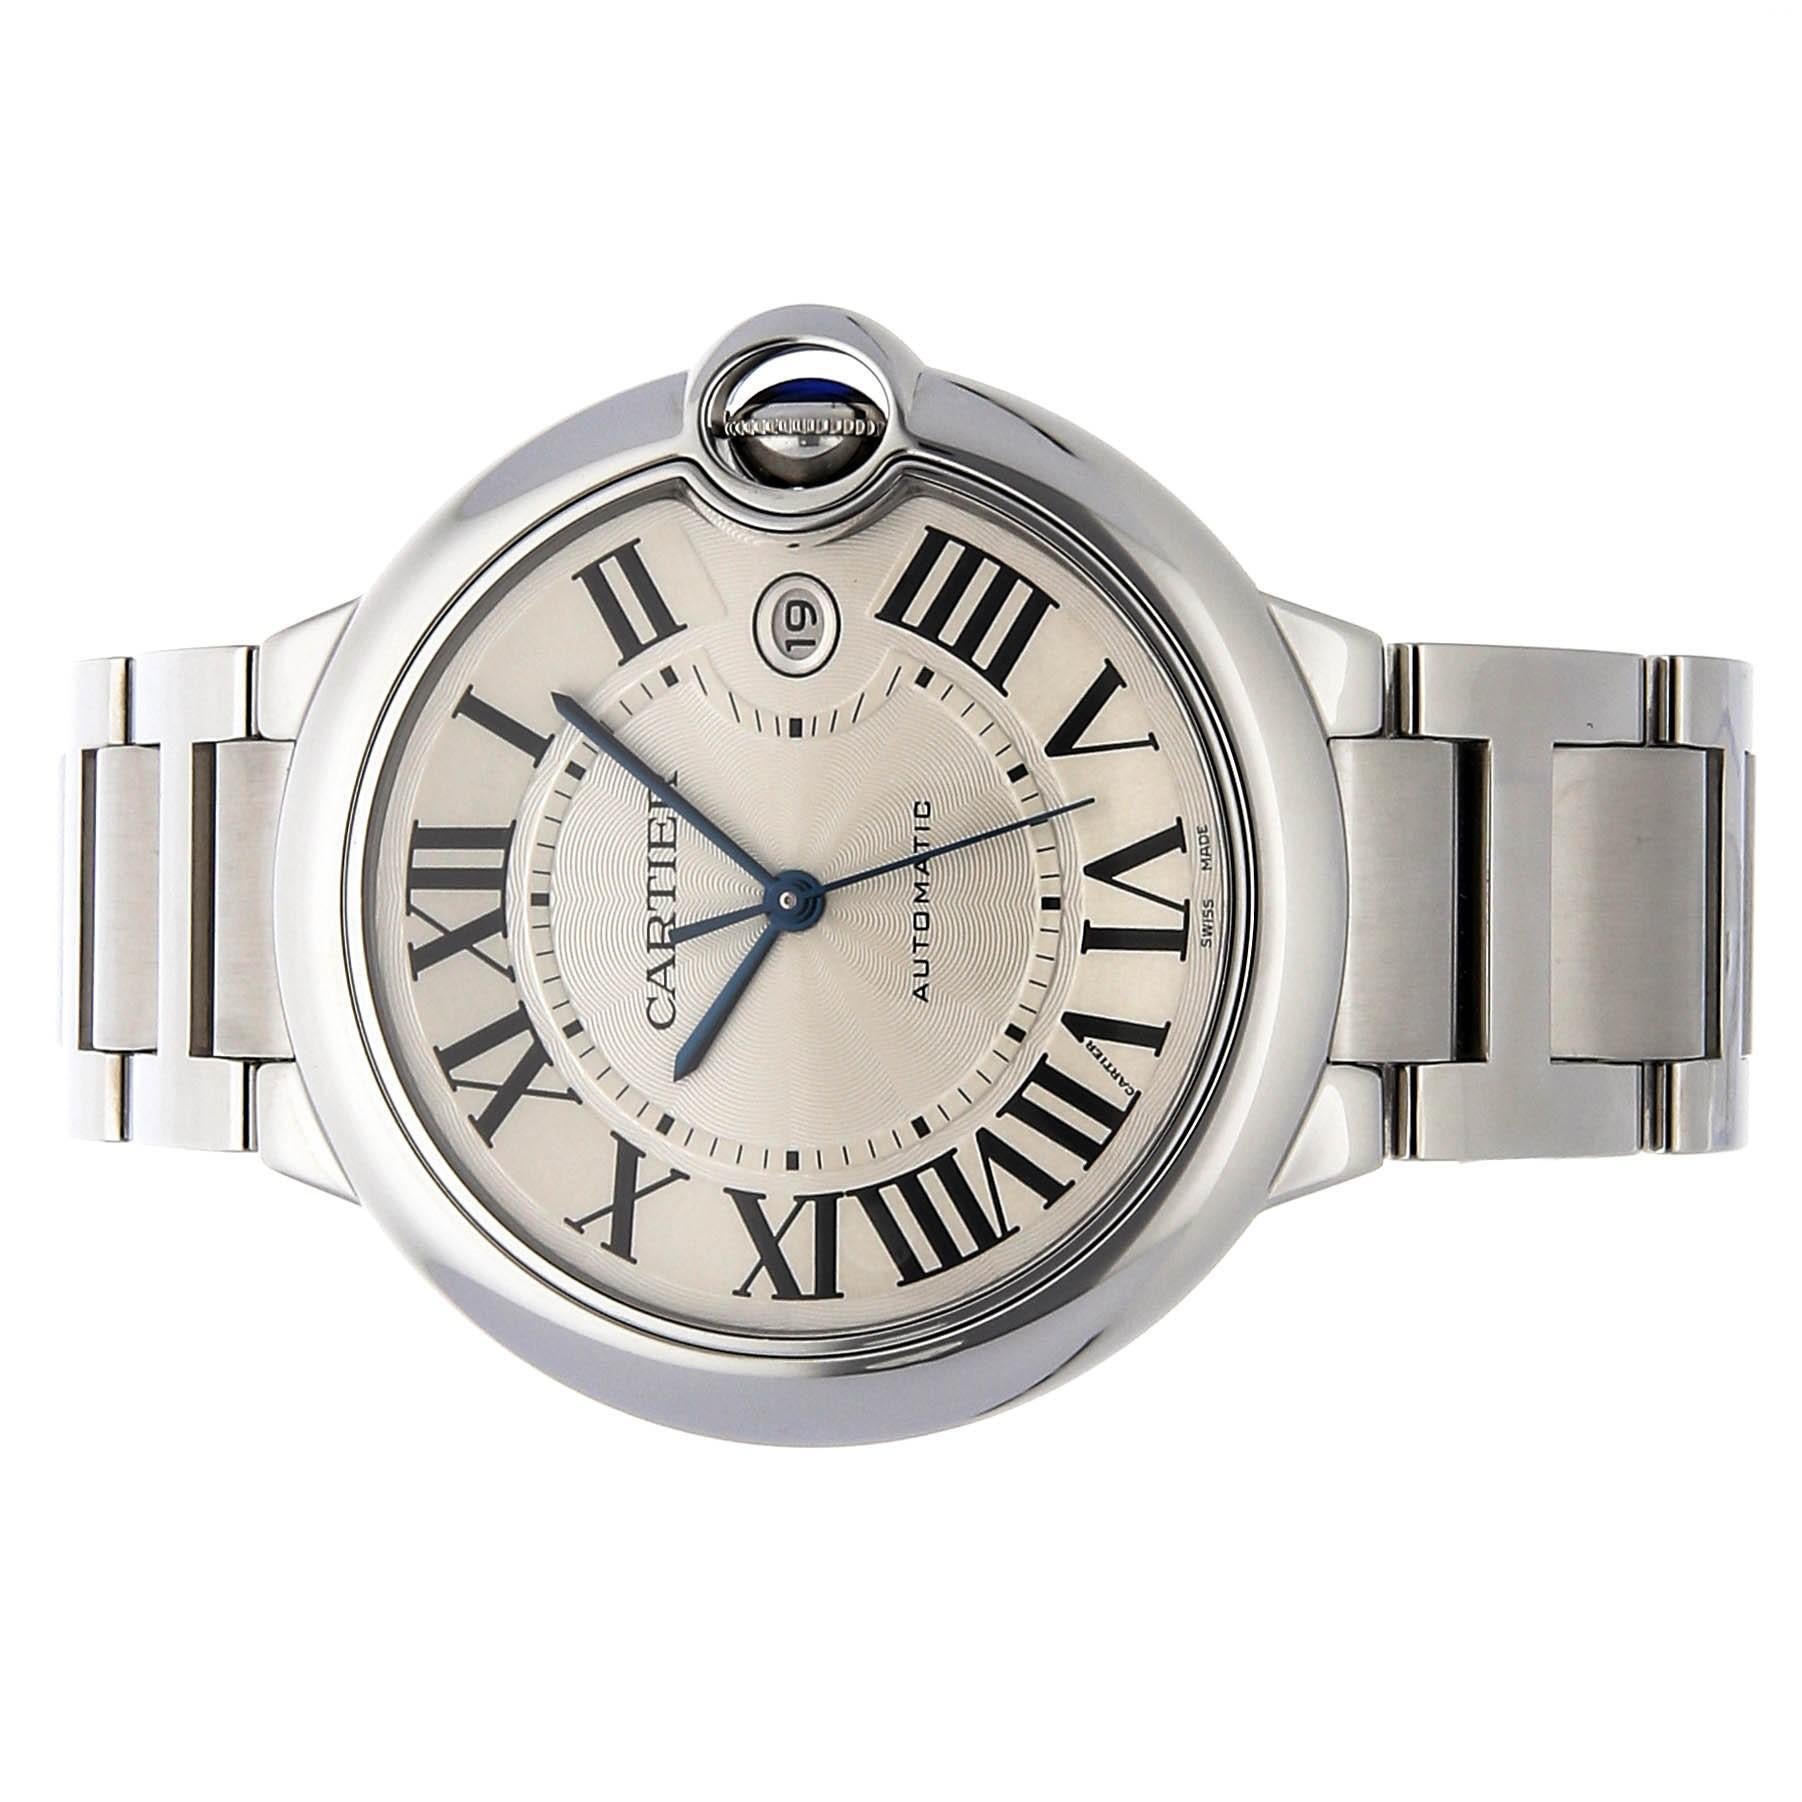 Ballon Bleu de Cartier watch, 42 mm, mechanical movement with automatic winding in excellent condition, purchased new in 2018 and was only worn occasionally for about 6 months.   

Steel case, fluted crown decorated with a synthetic spinel cabochon,